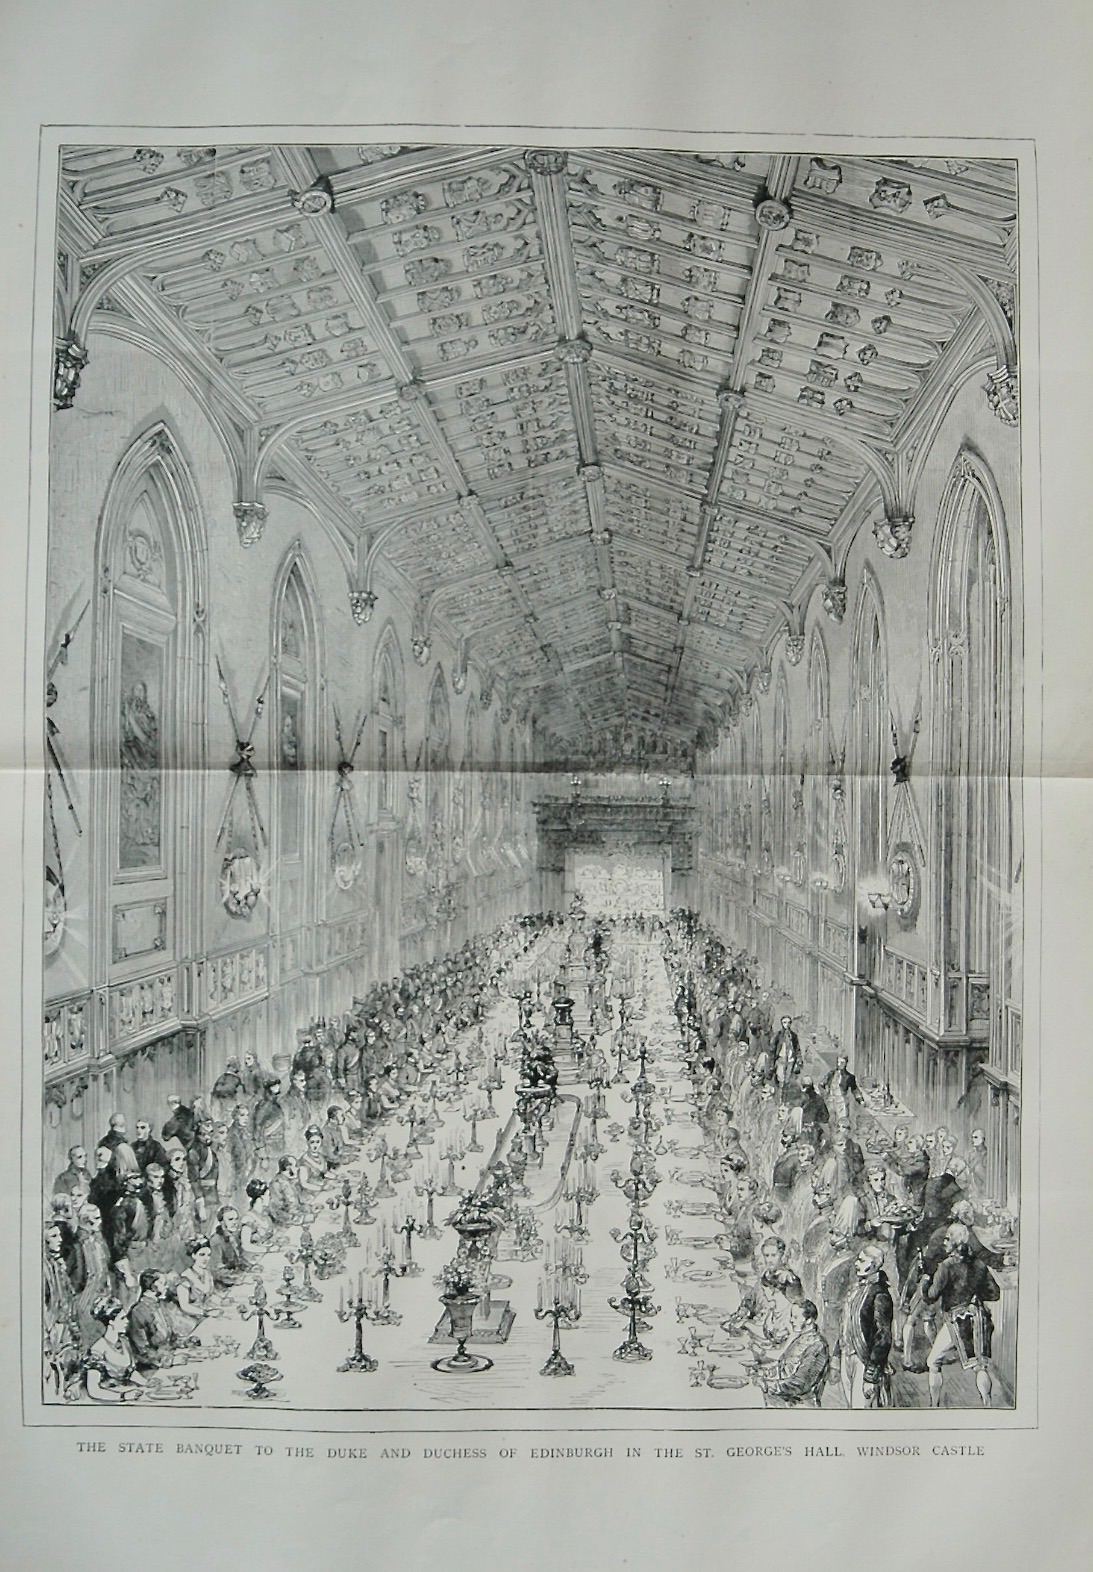 The State Banquet at Windsor Castle - 1874